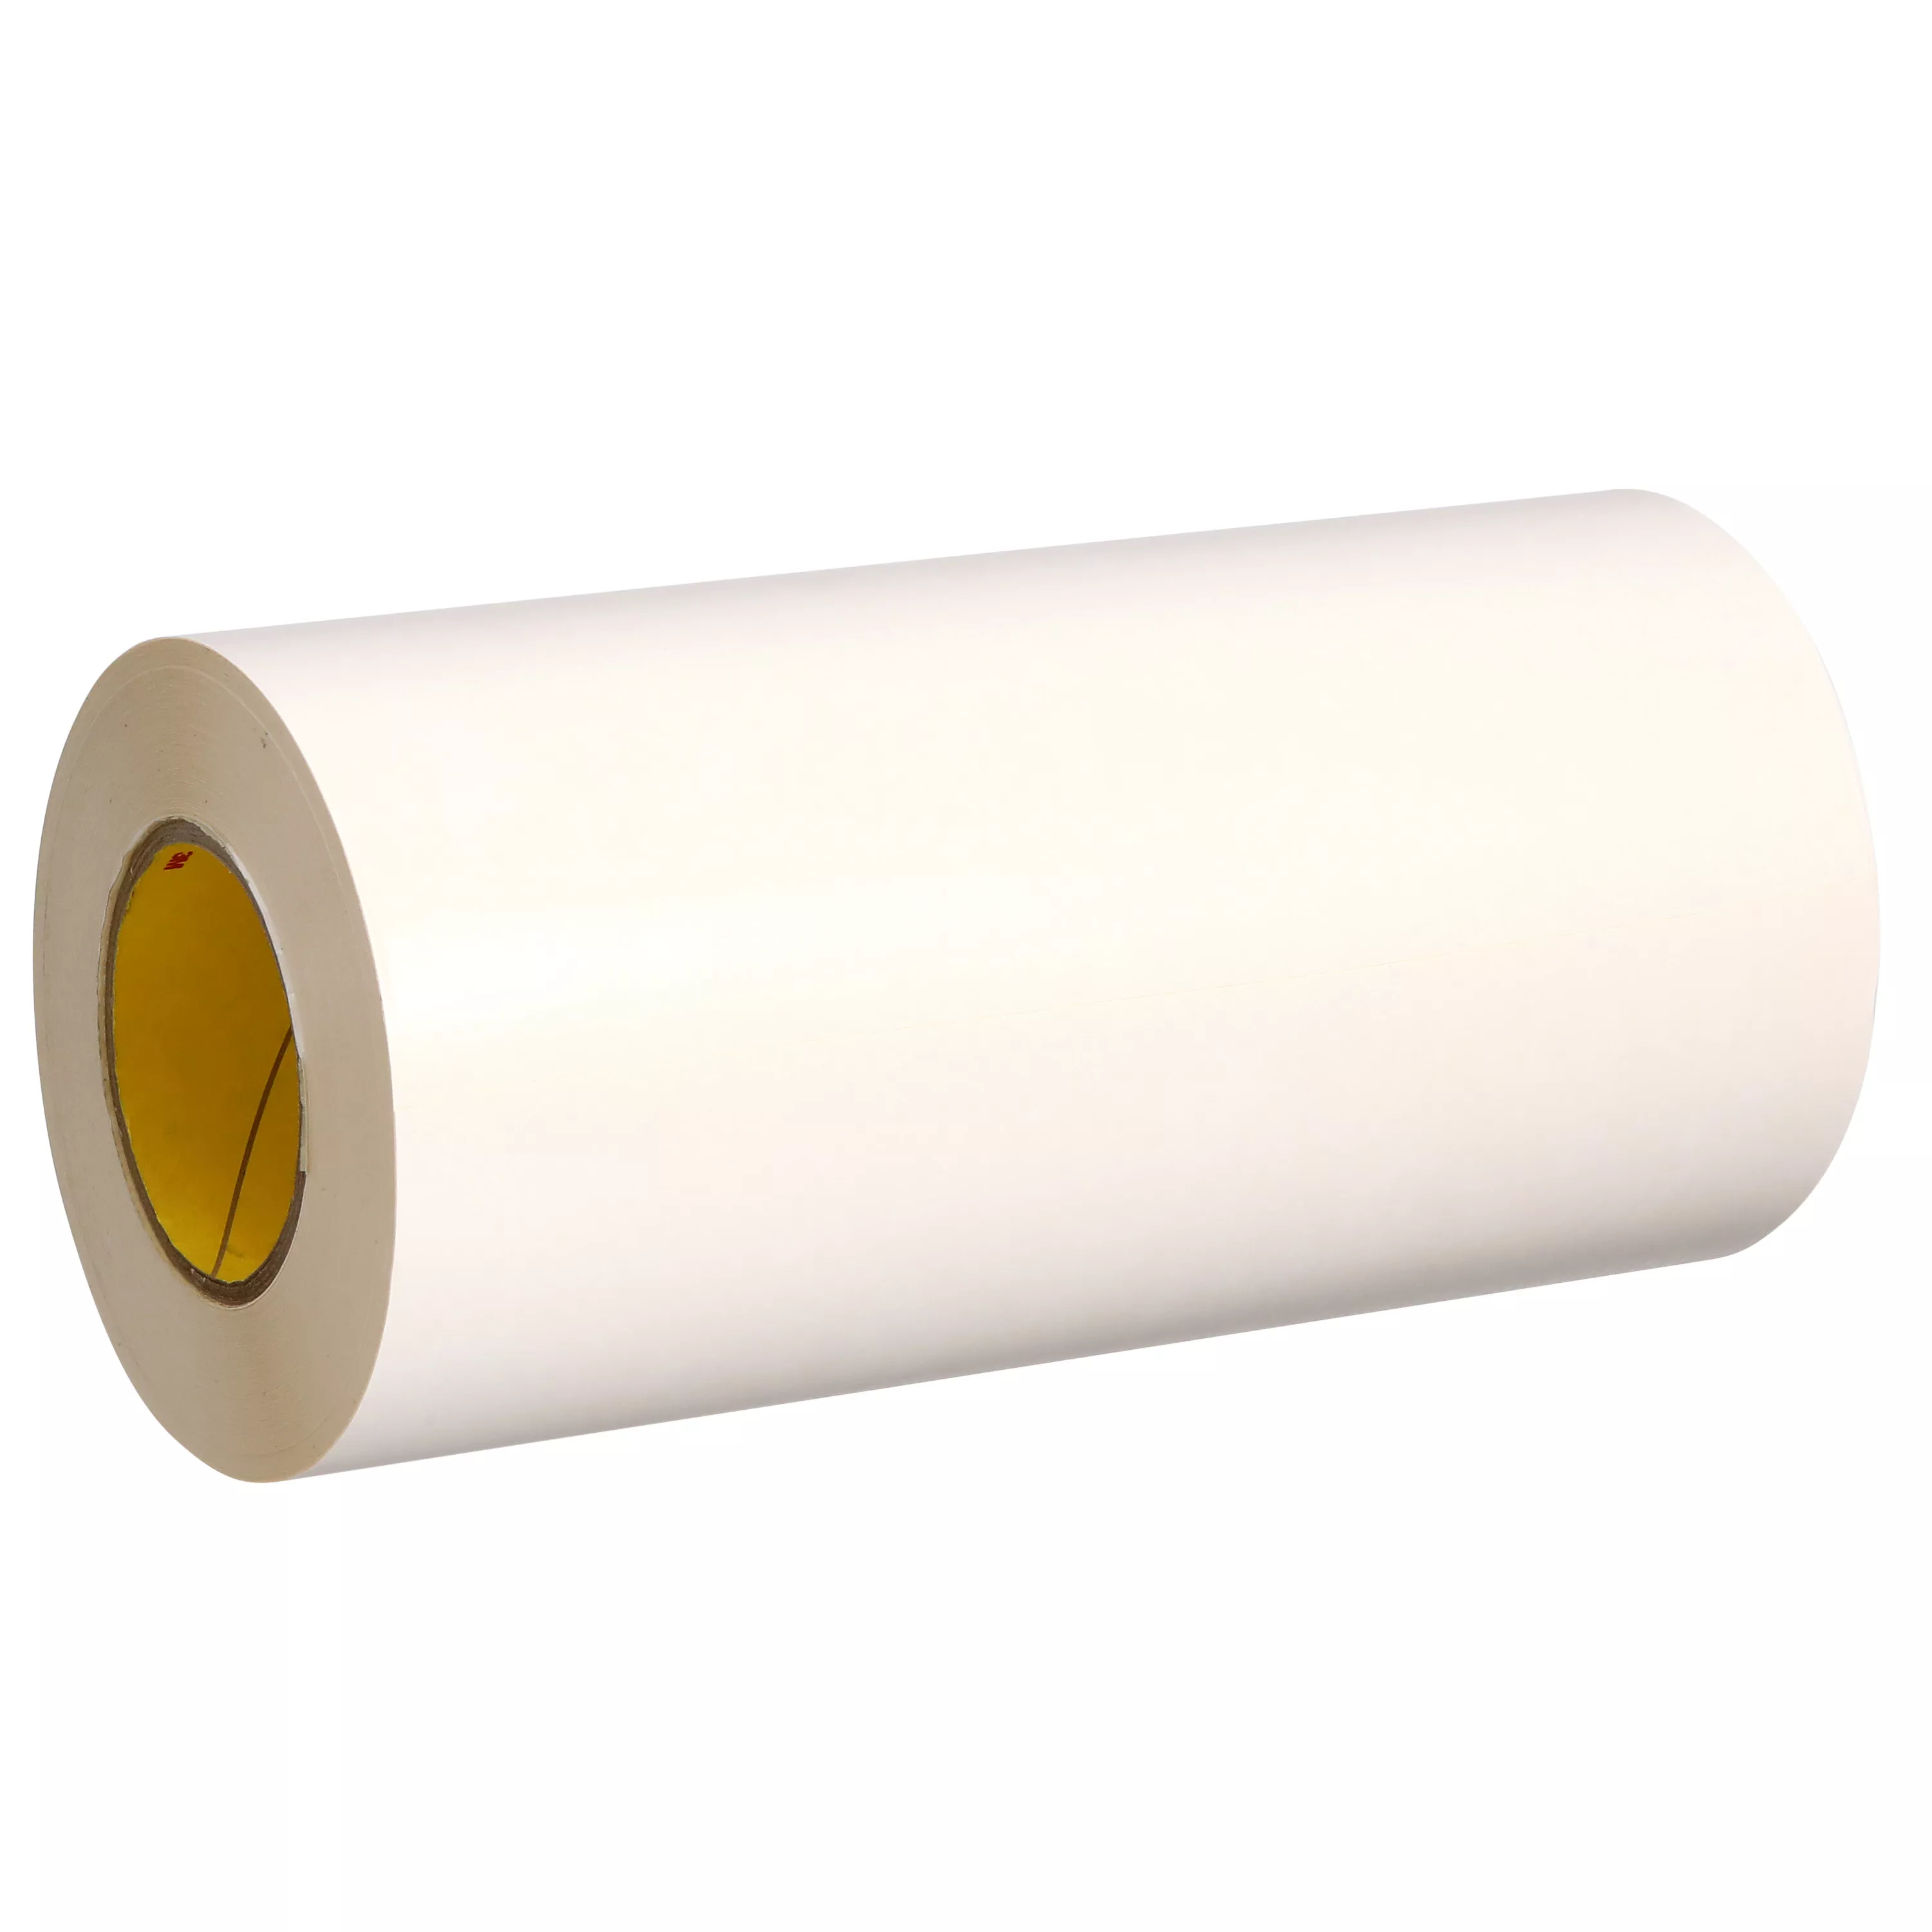 SKU 7100171705 | 3M™ Double Coated Polyester Tape 442KW